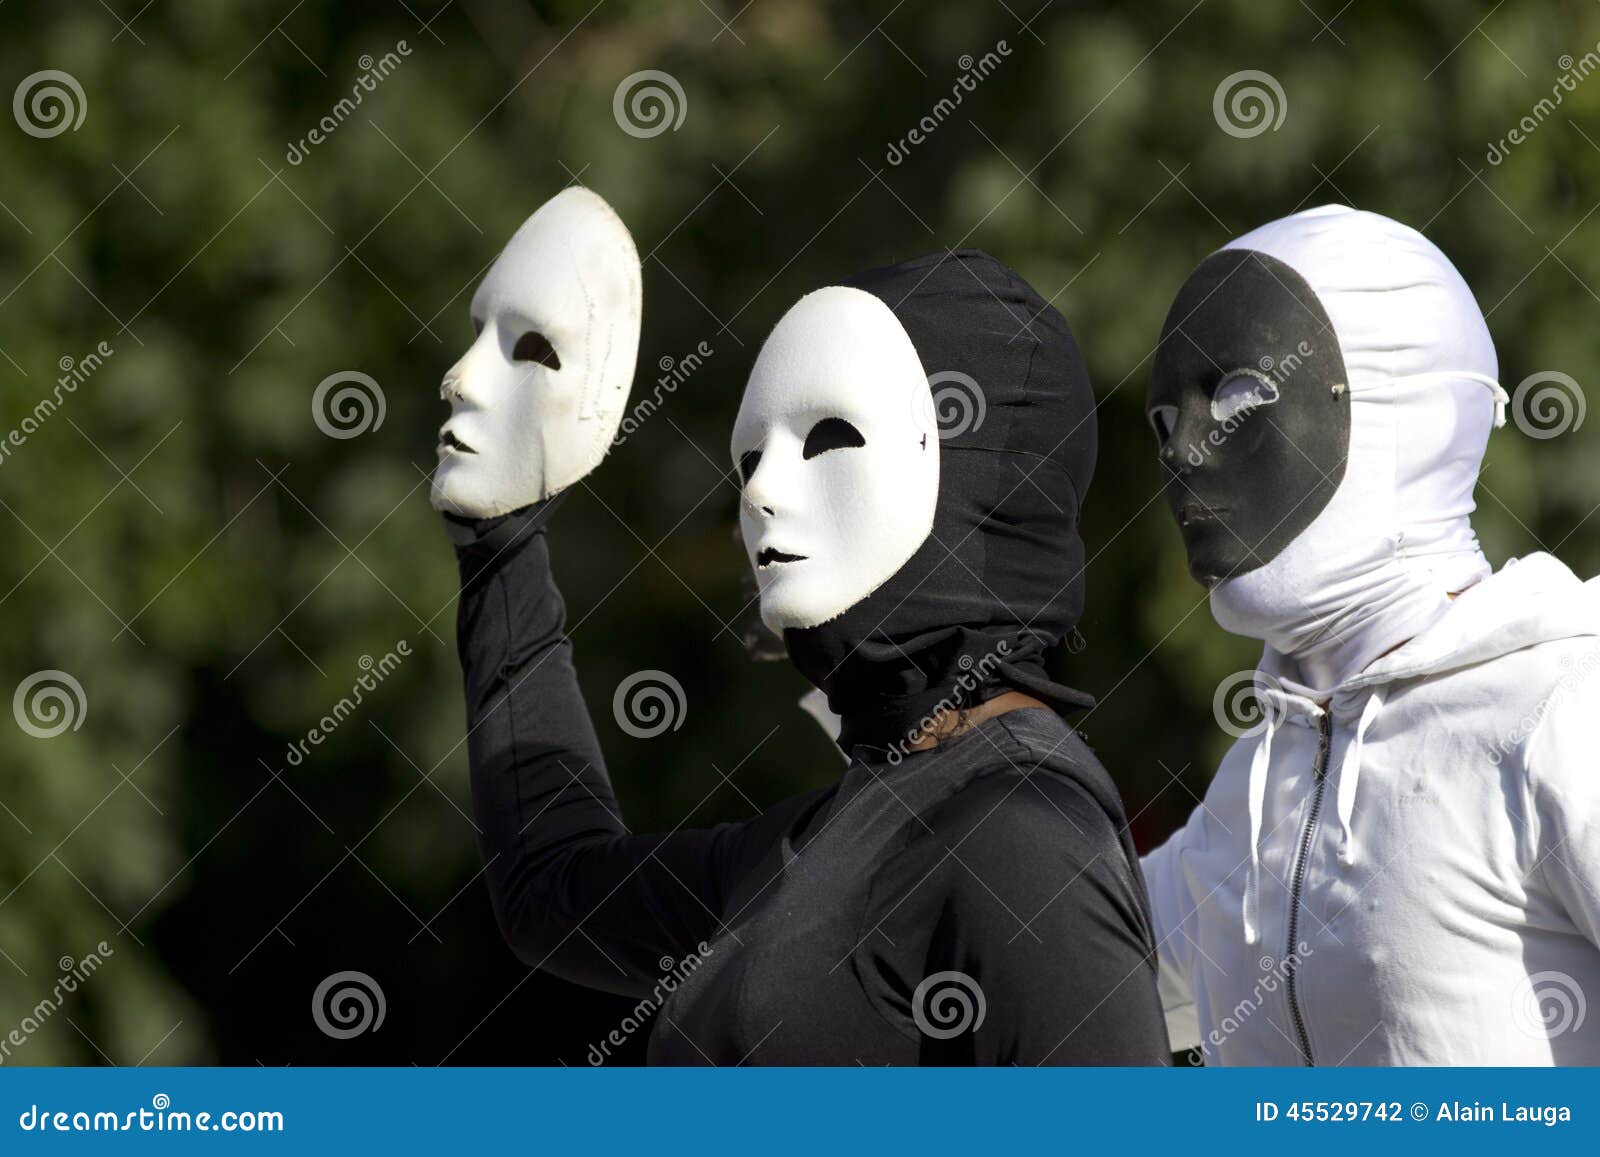 Two Masked Actors Wearing and Suits. Editorial Photography - Image of animation, masks: